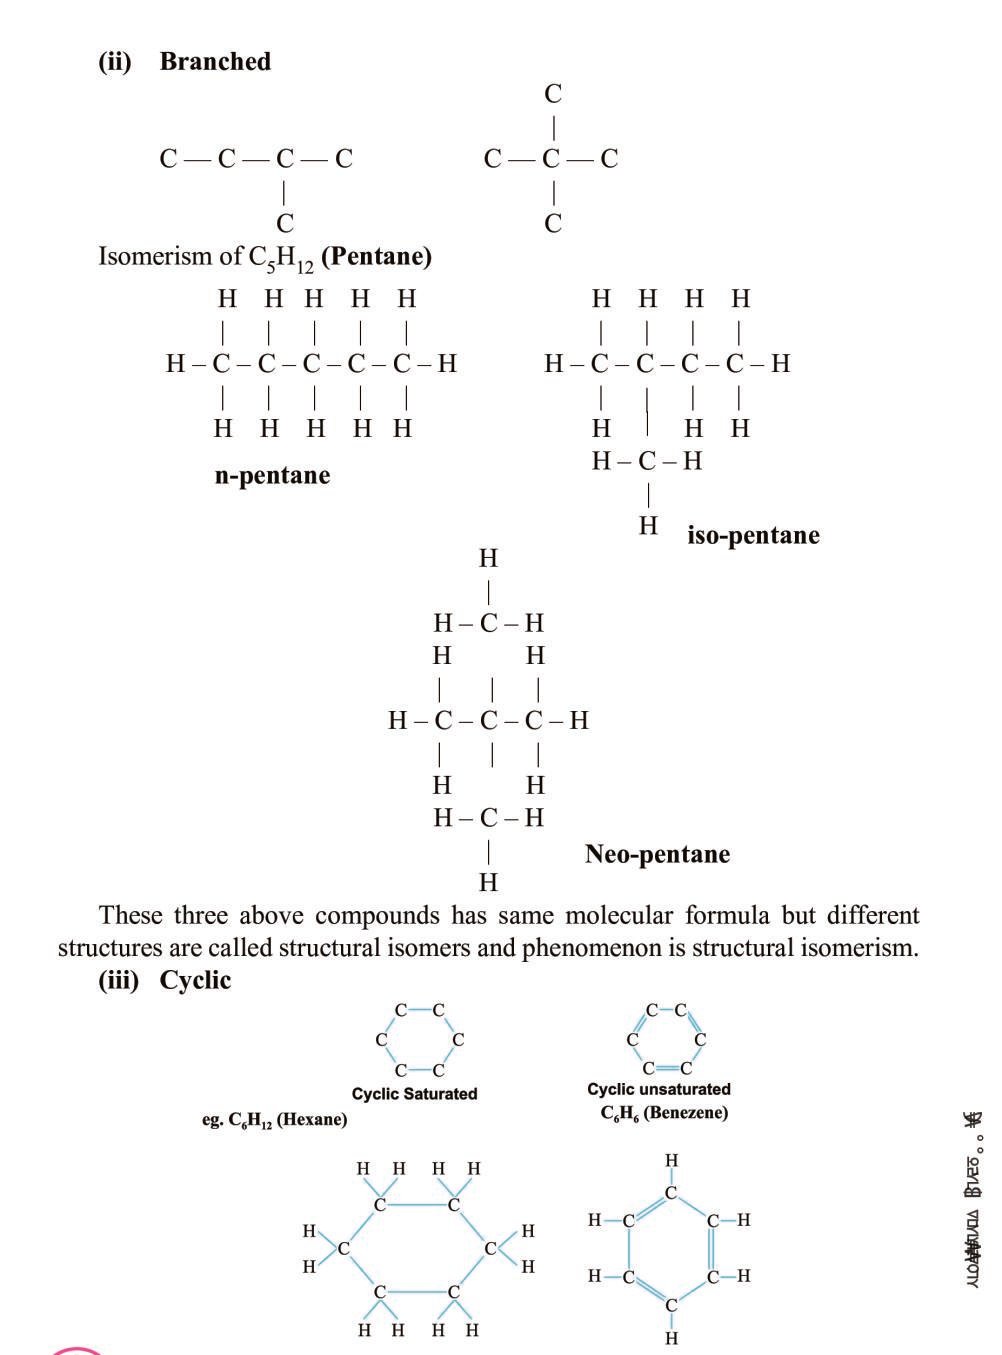 Class 10 Science Notes for Carbon and Its Compound (PDF) - Study Material